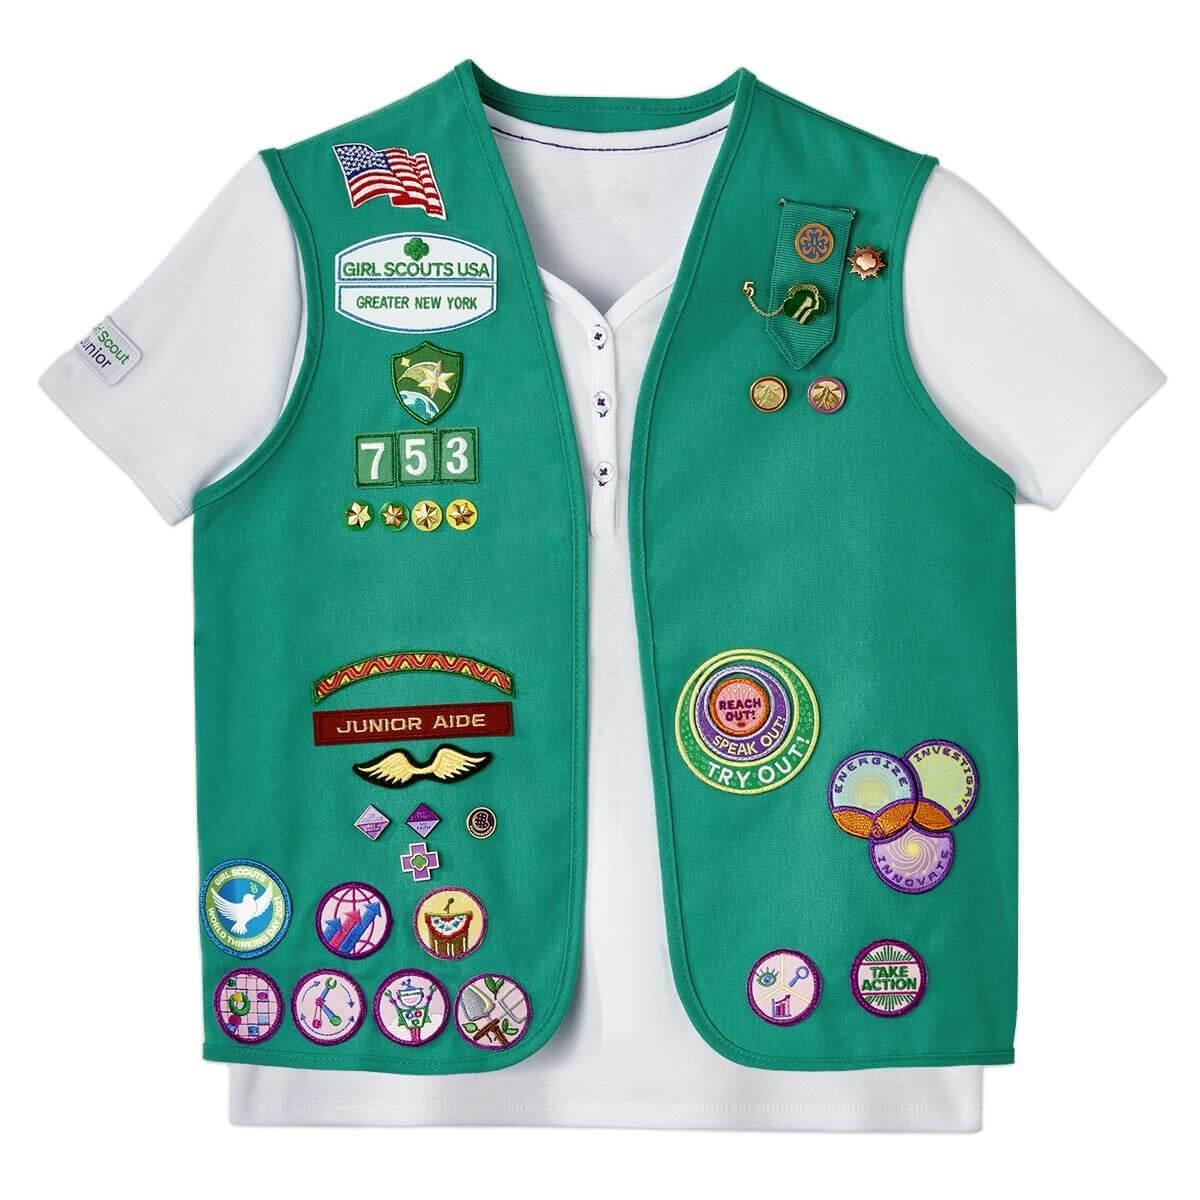 Girl Scouts - October is the perfect month for patches, Girl Scout